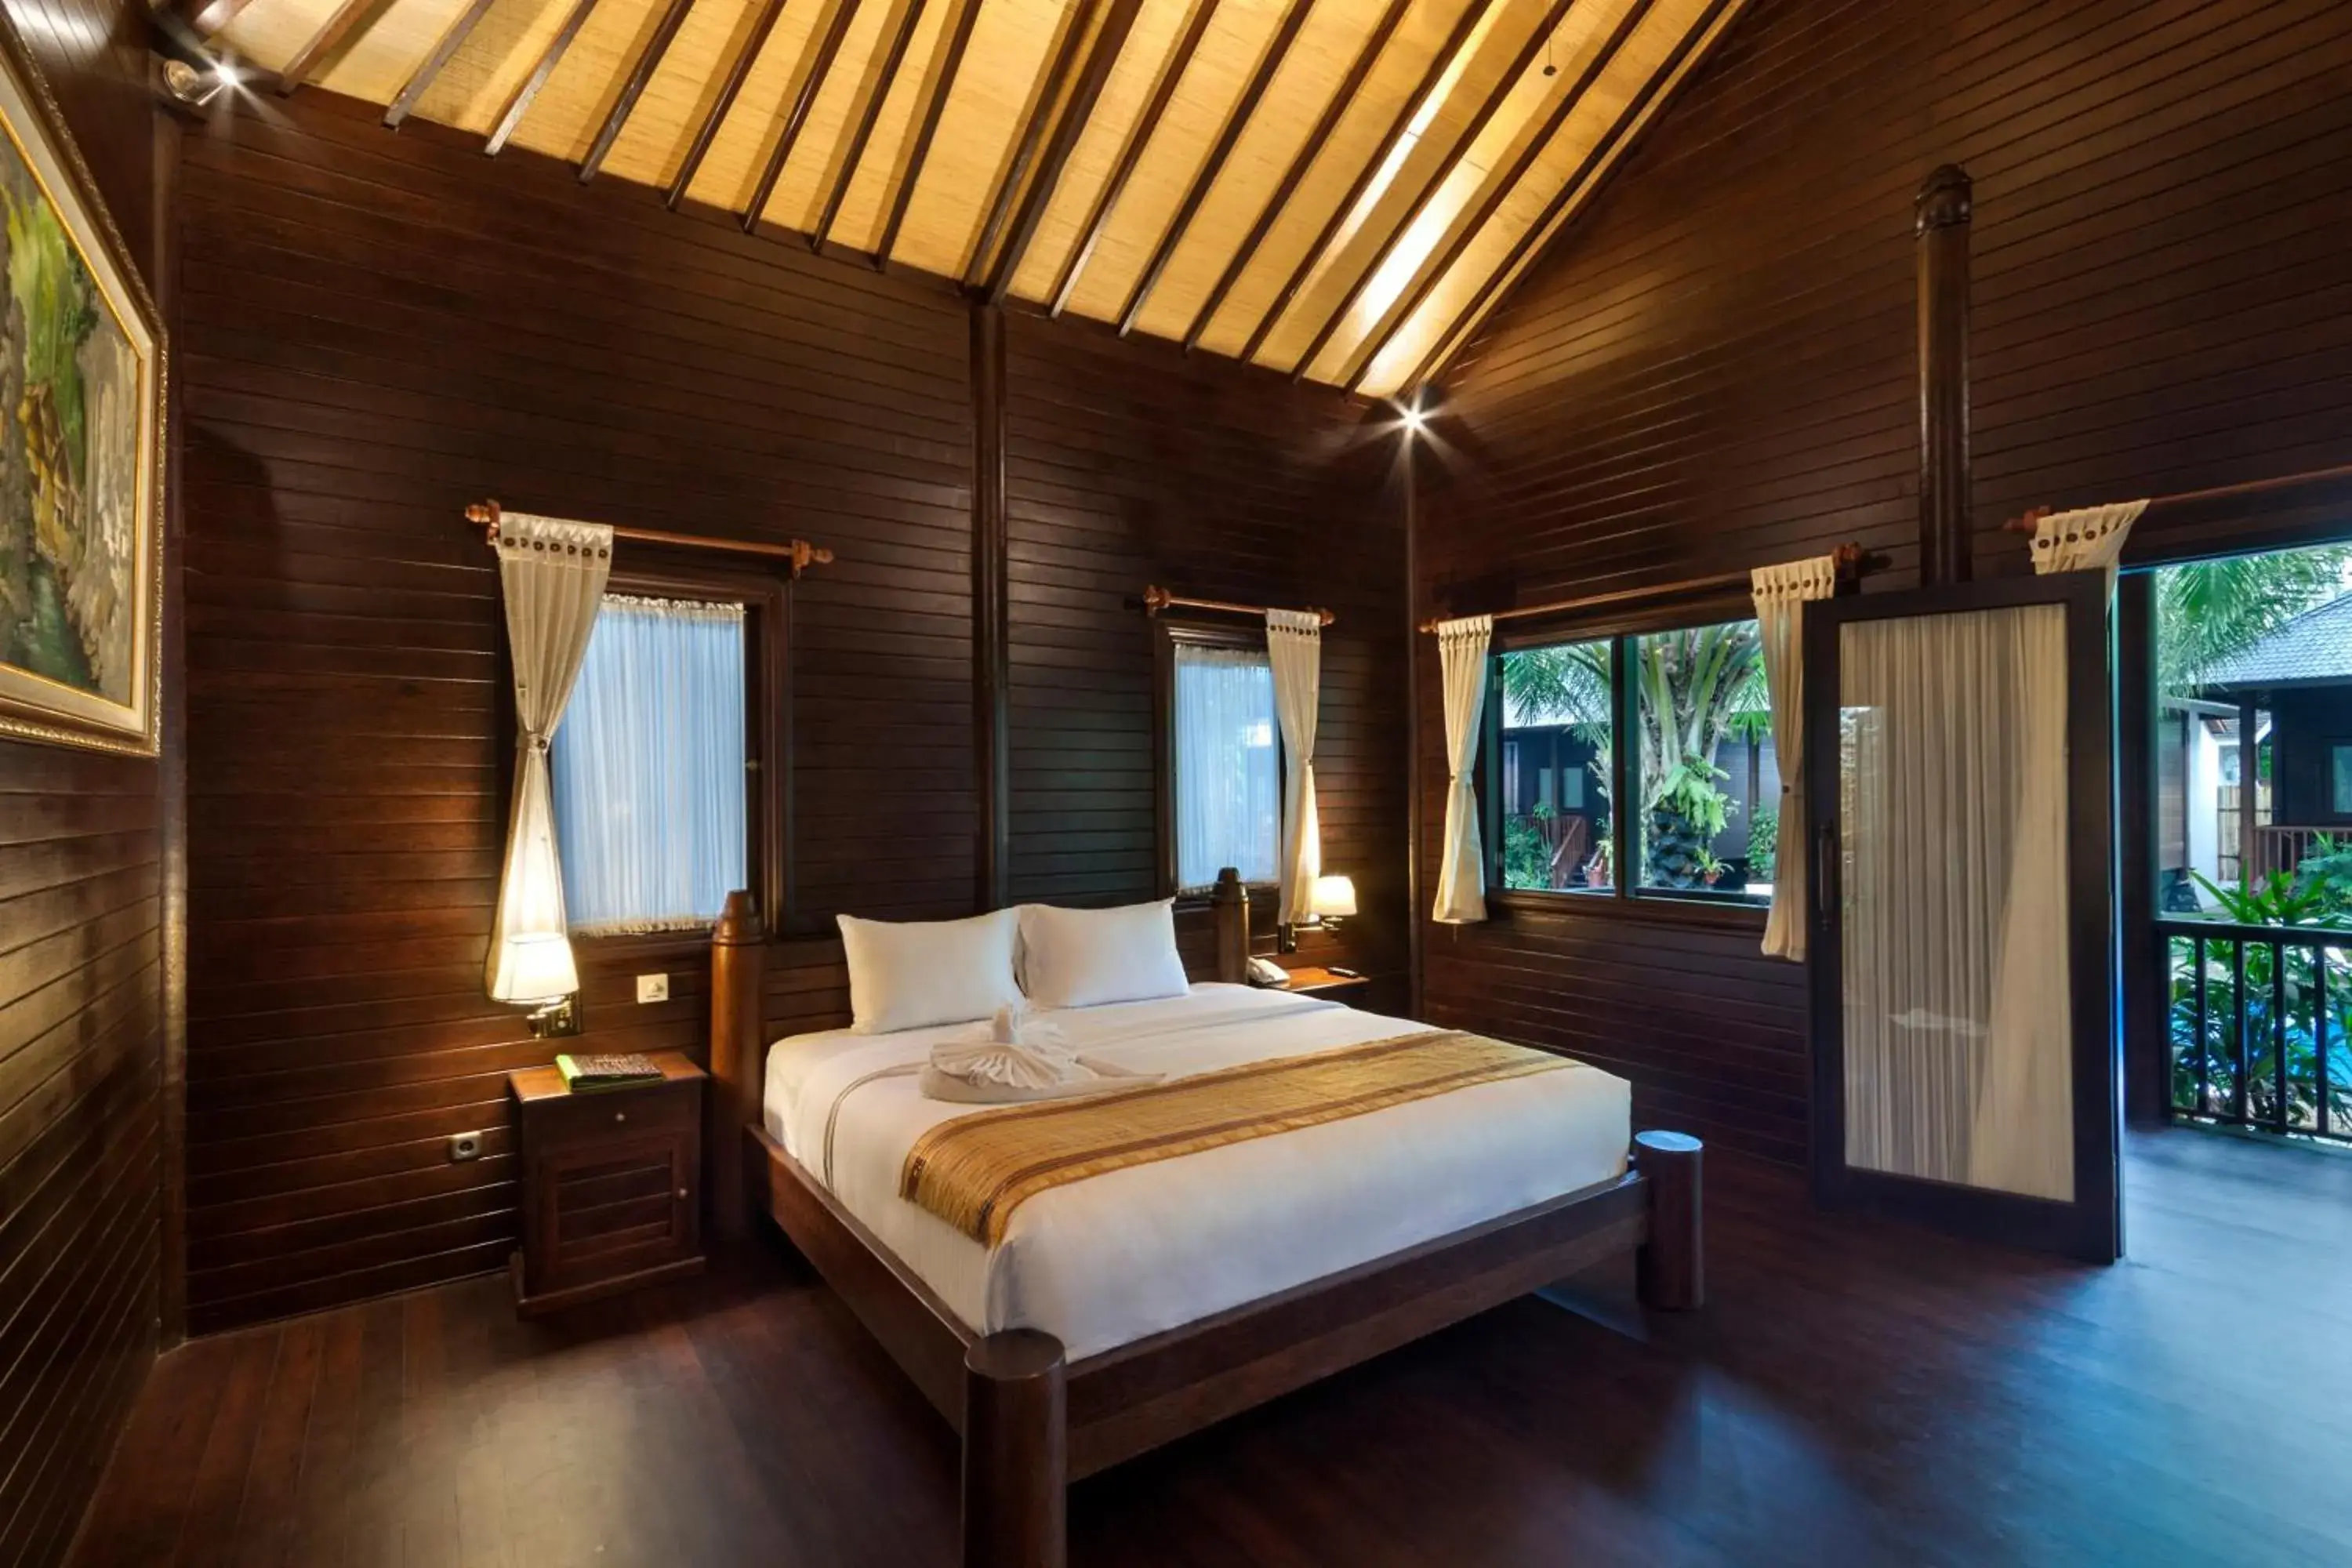 Bed, Room Photo in Coconut Boutique Resort